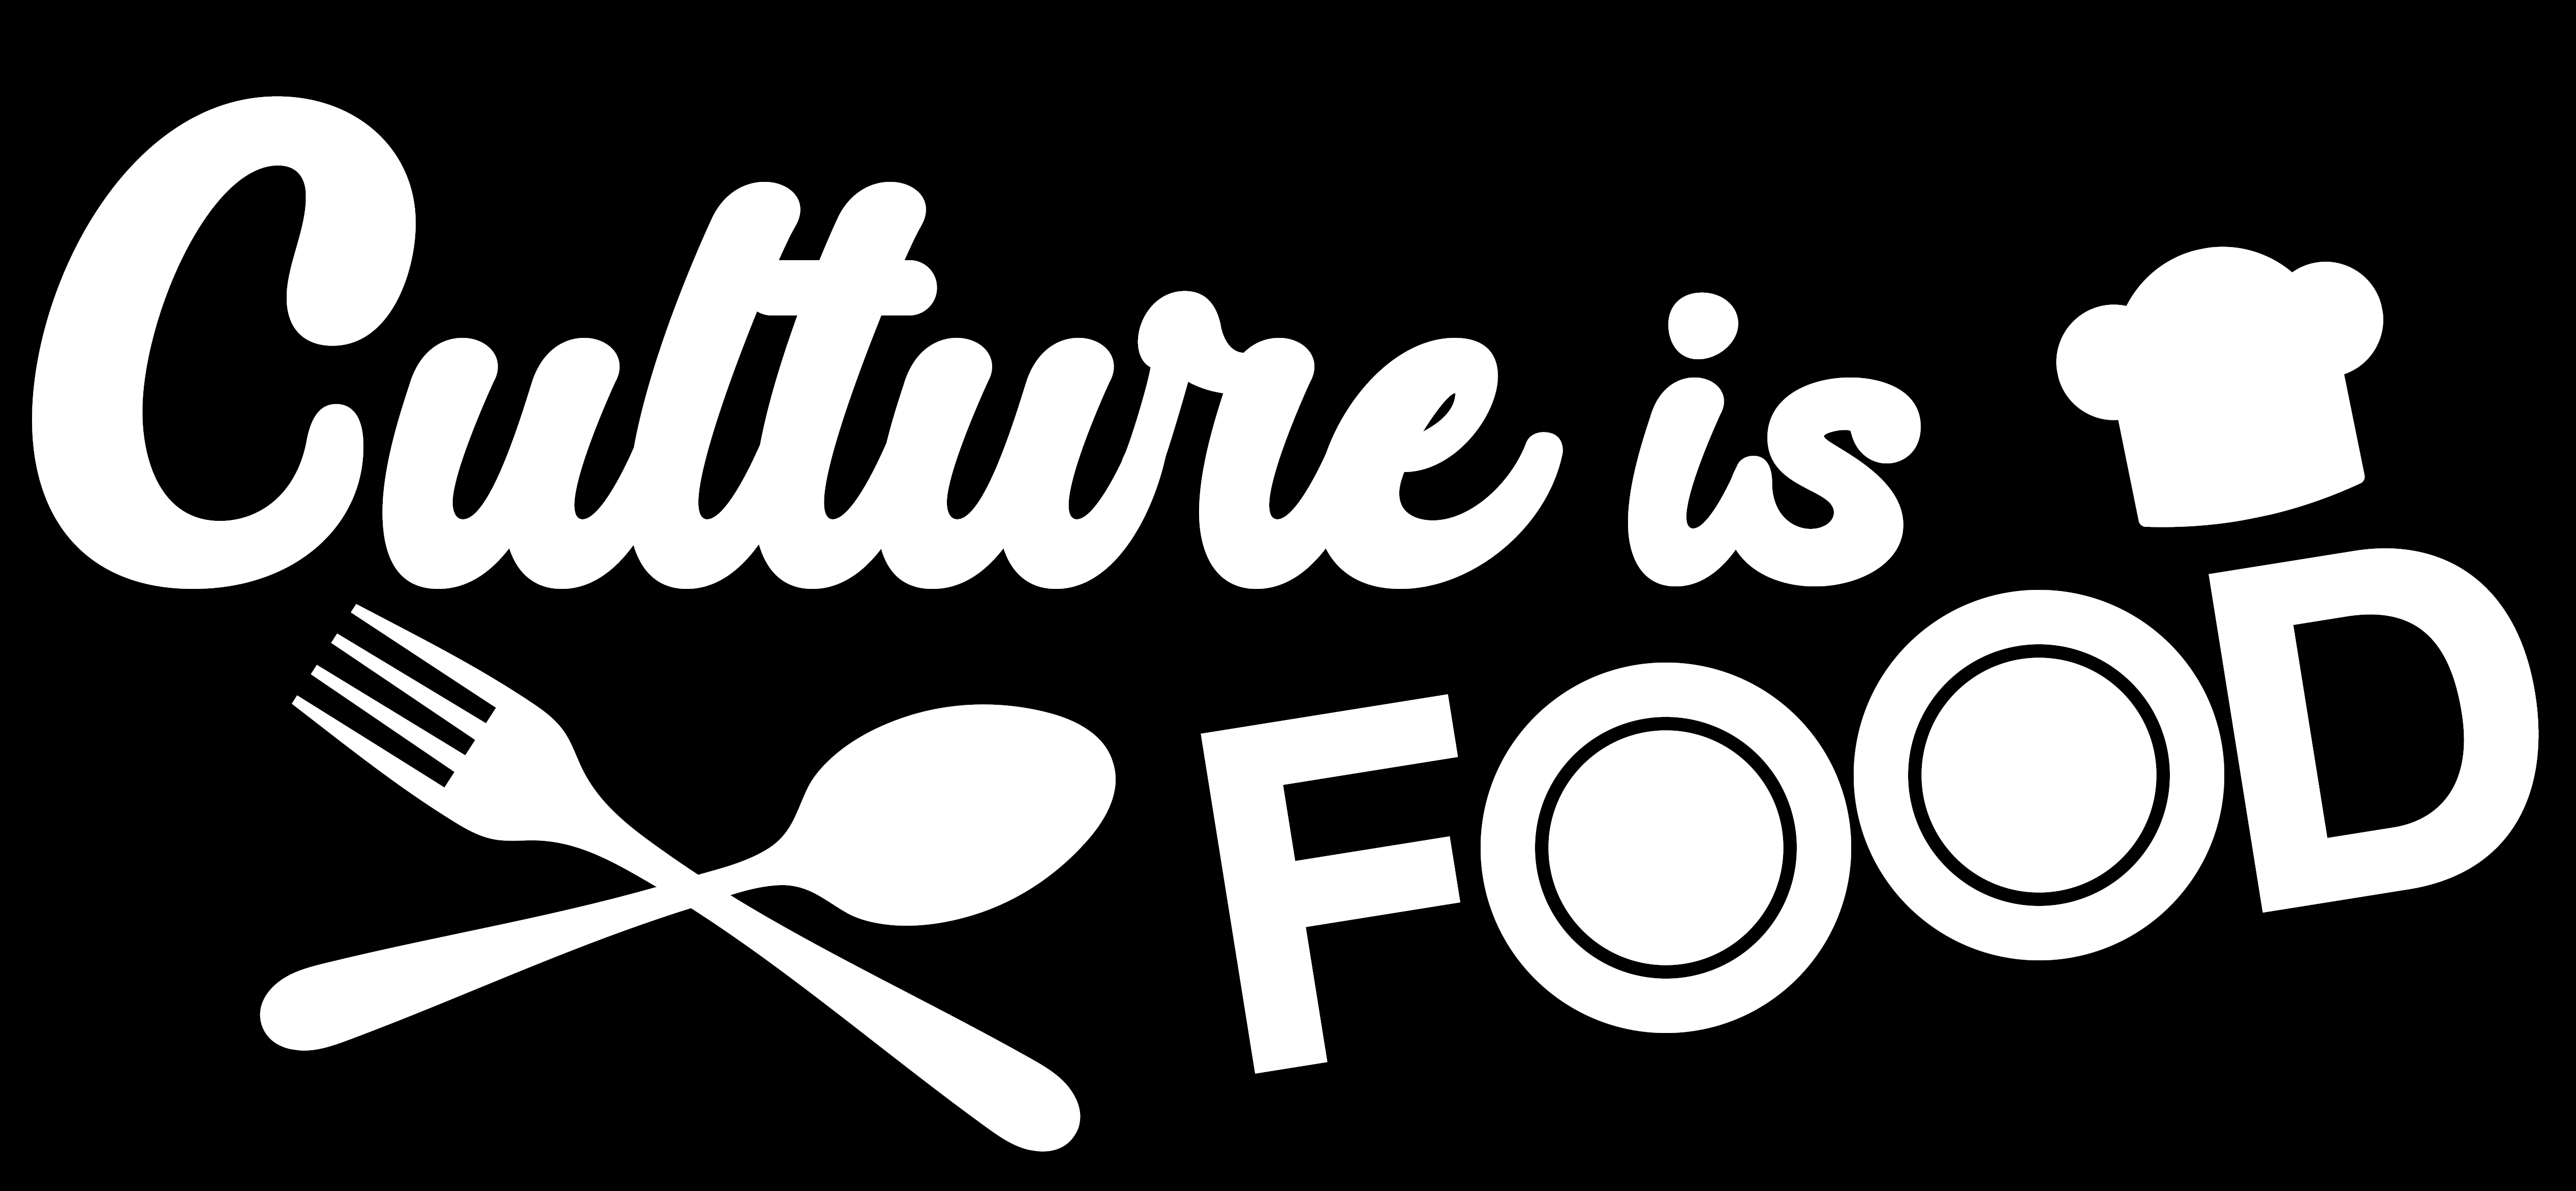 Culture is food presented by Culture & cannabis in Las Vegas